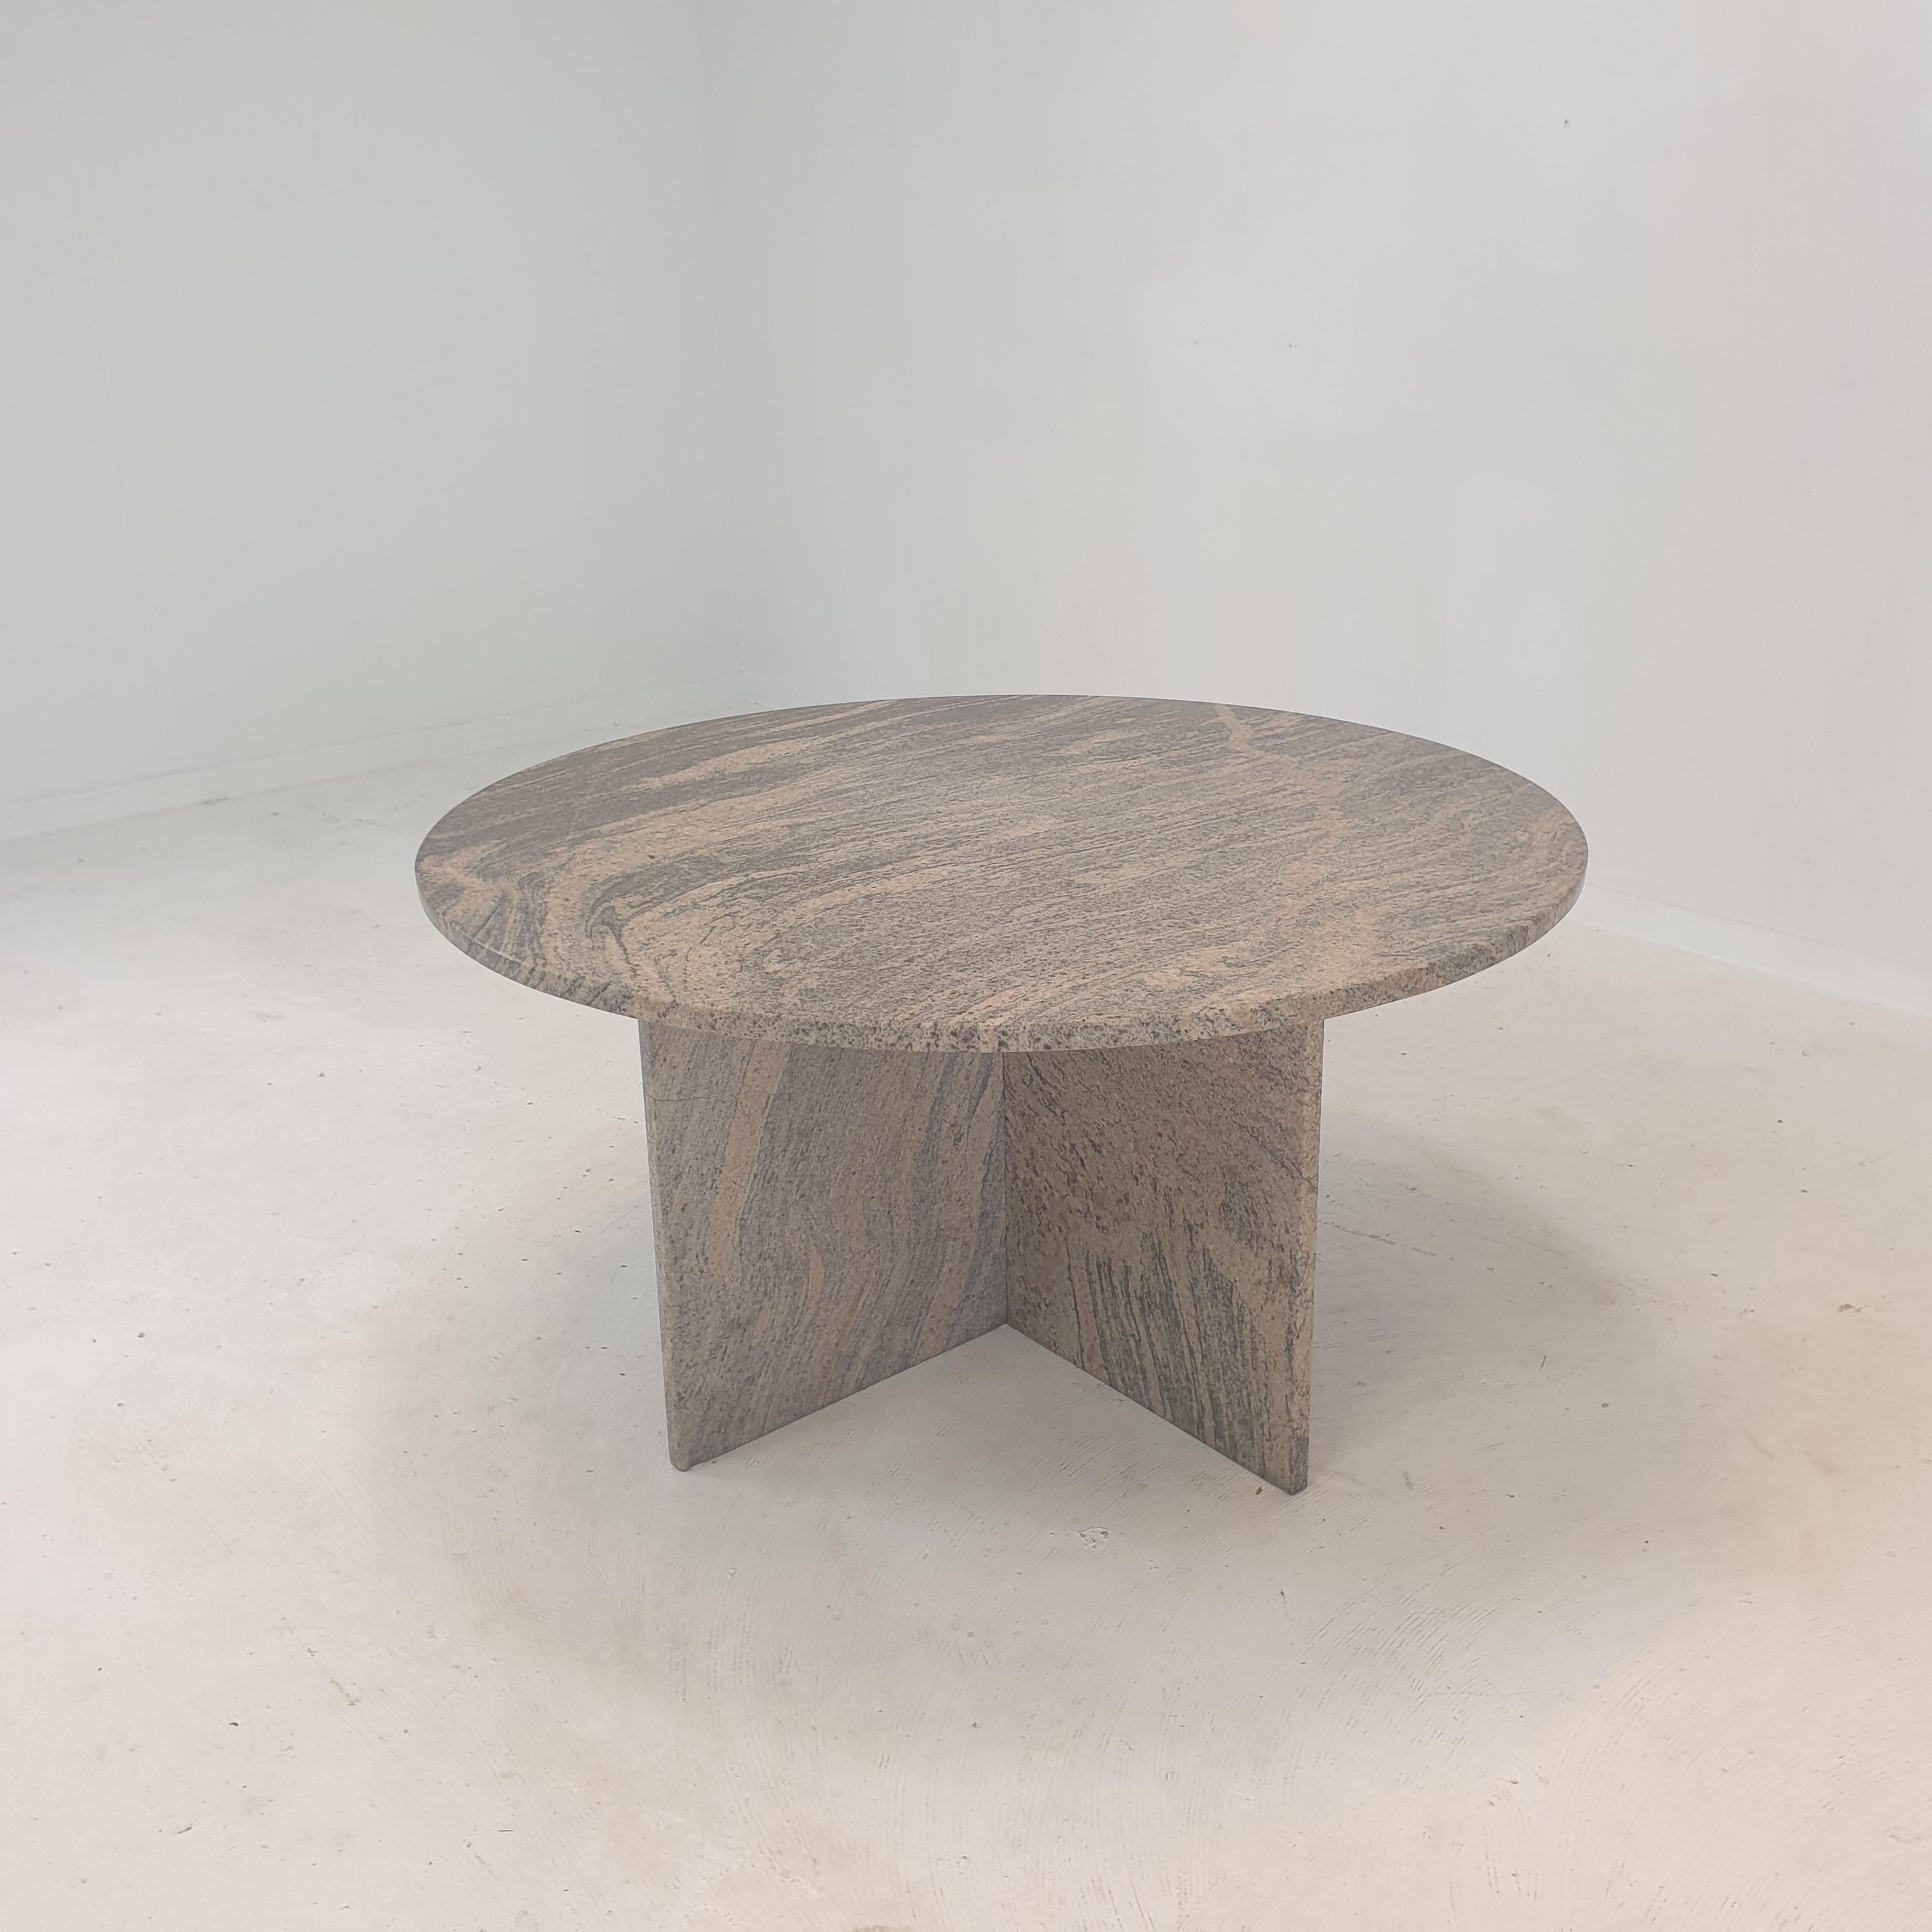 Very nice Italian coffee table, 1980's.

It is made of beautiful stone.

It is in very good condition.

We work with professional packers and shippers.